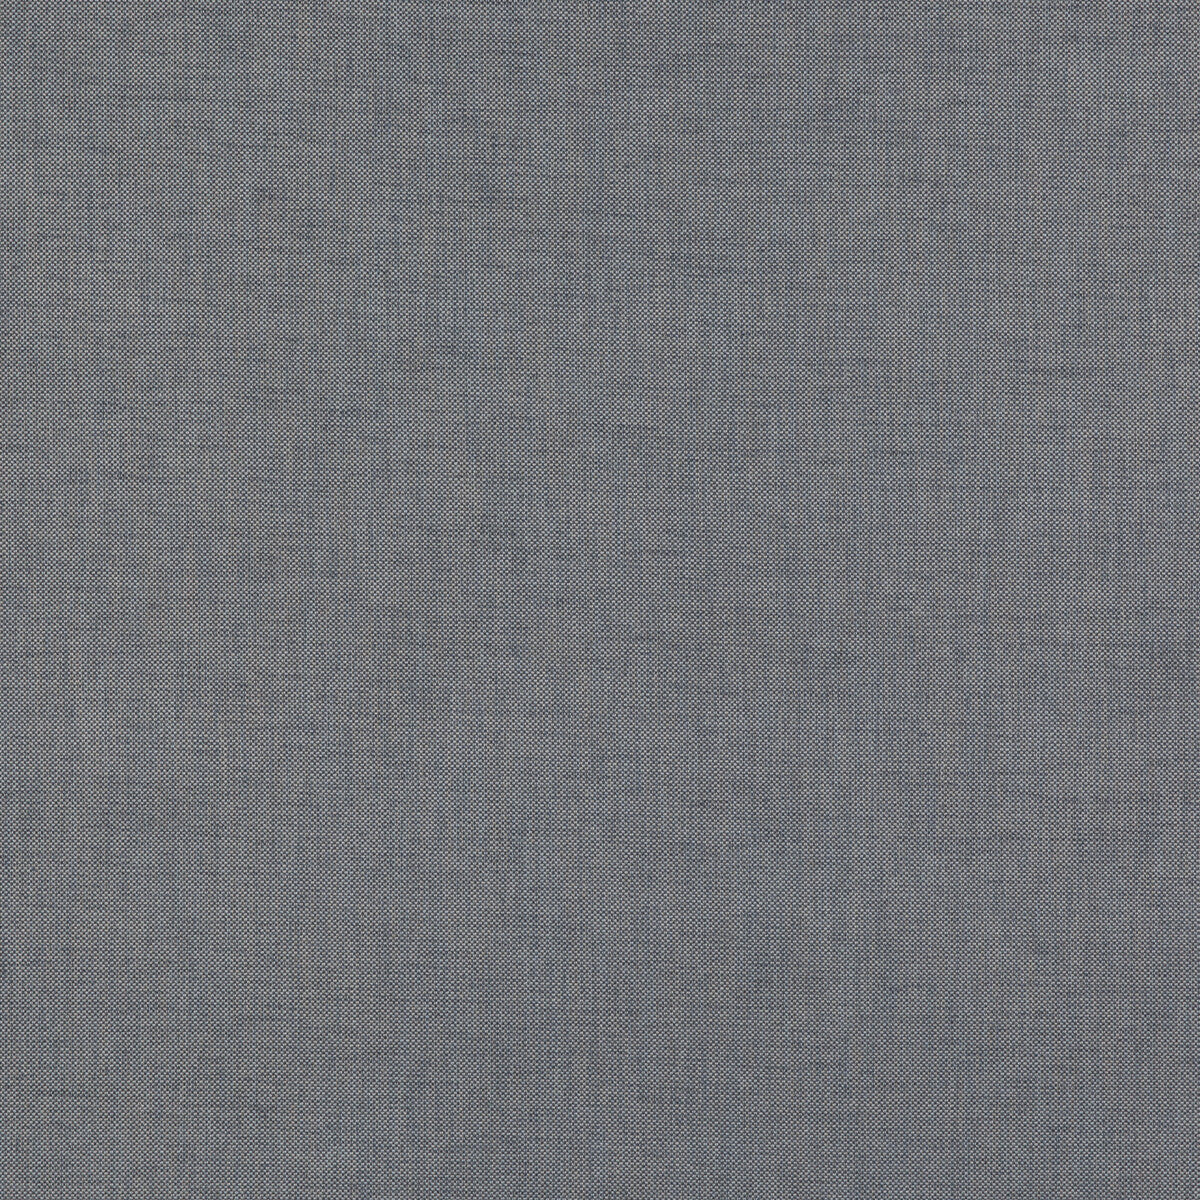 Darwen fabric in indigo color - pattern BF10957.680.0 - by G P &amp; J Baker in the Baker House Textures collection